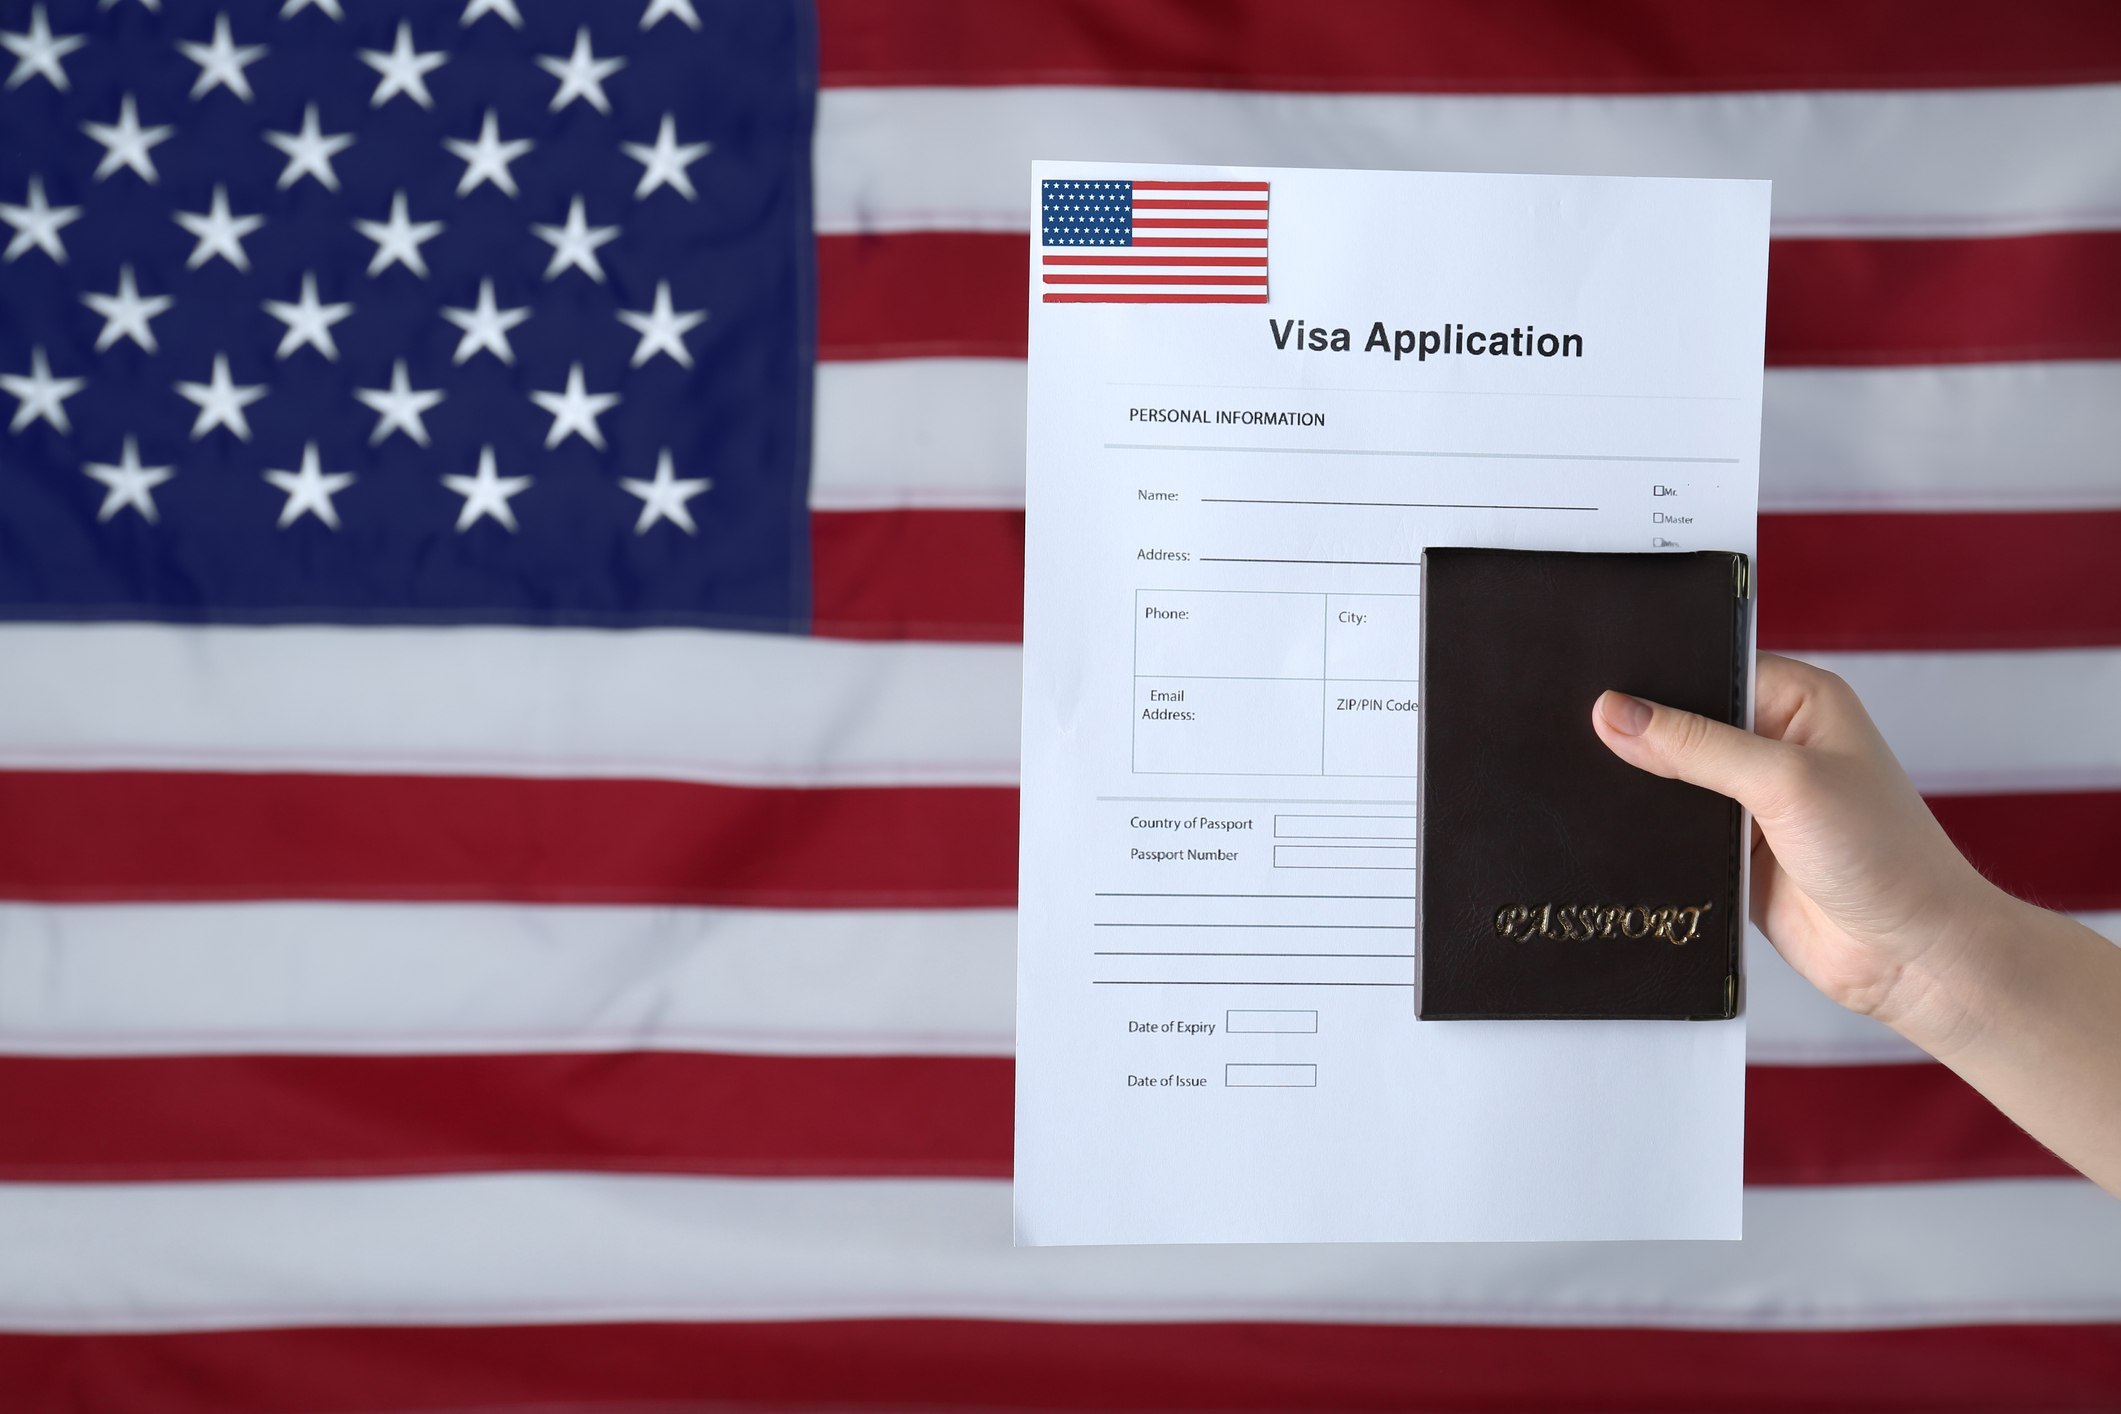 EB-2 National Interest Waiver (NIW): Get a Green Card with your